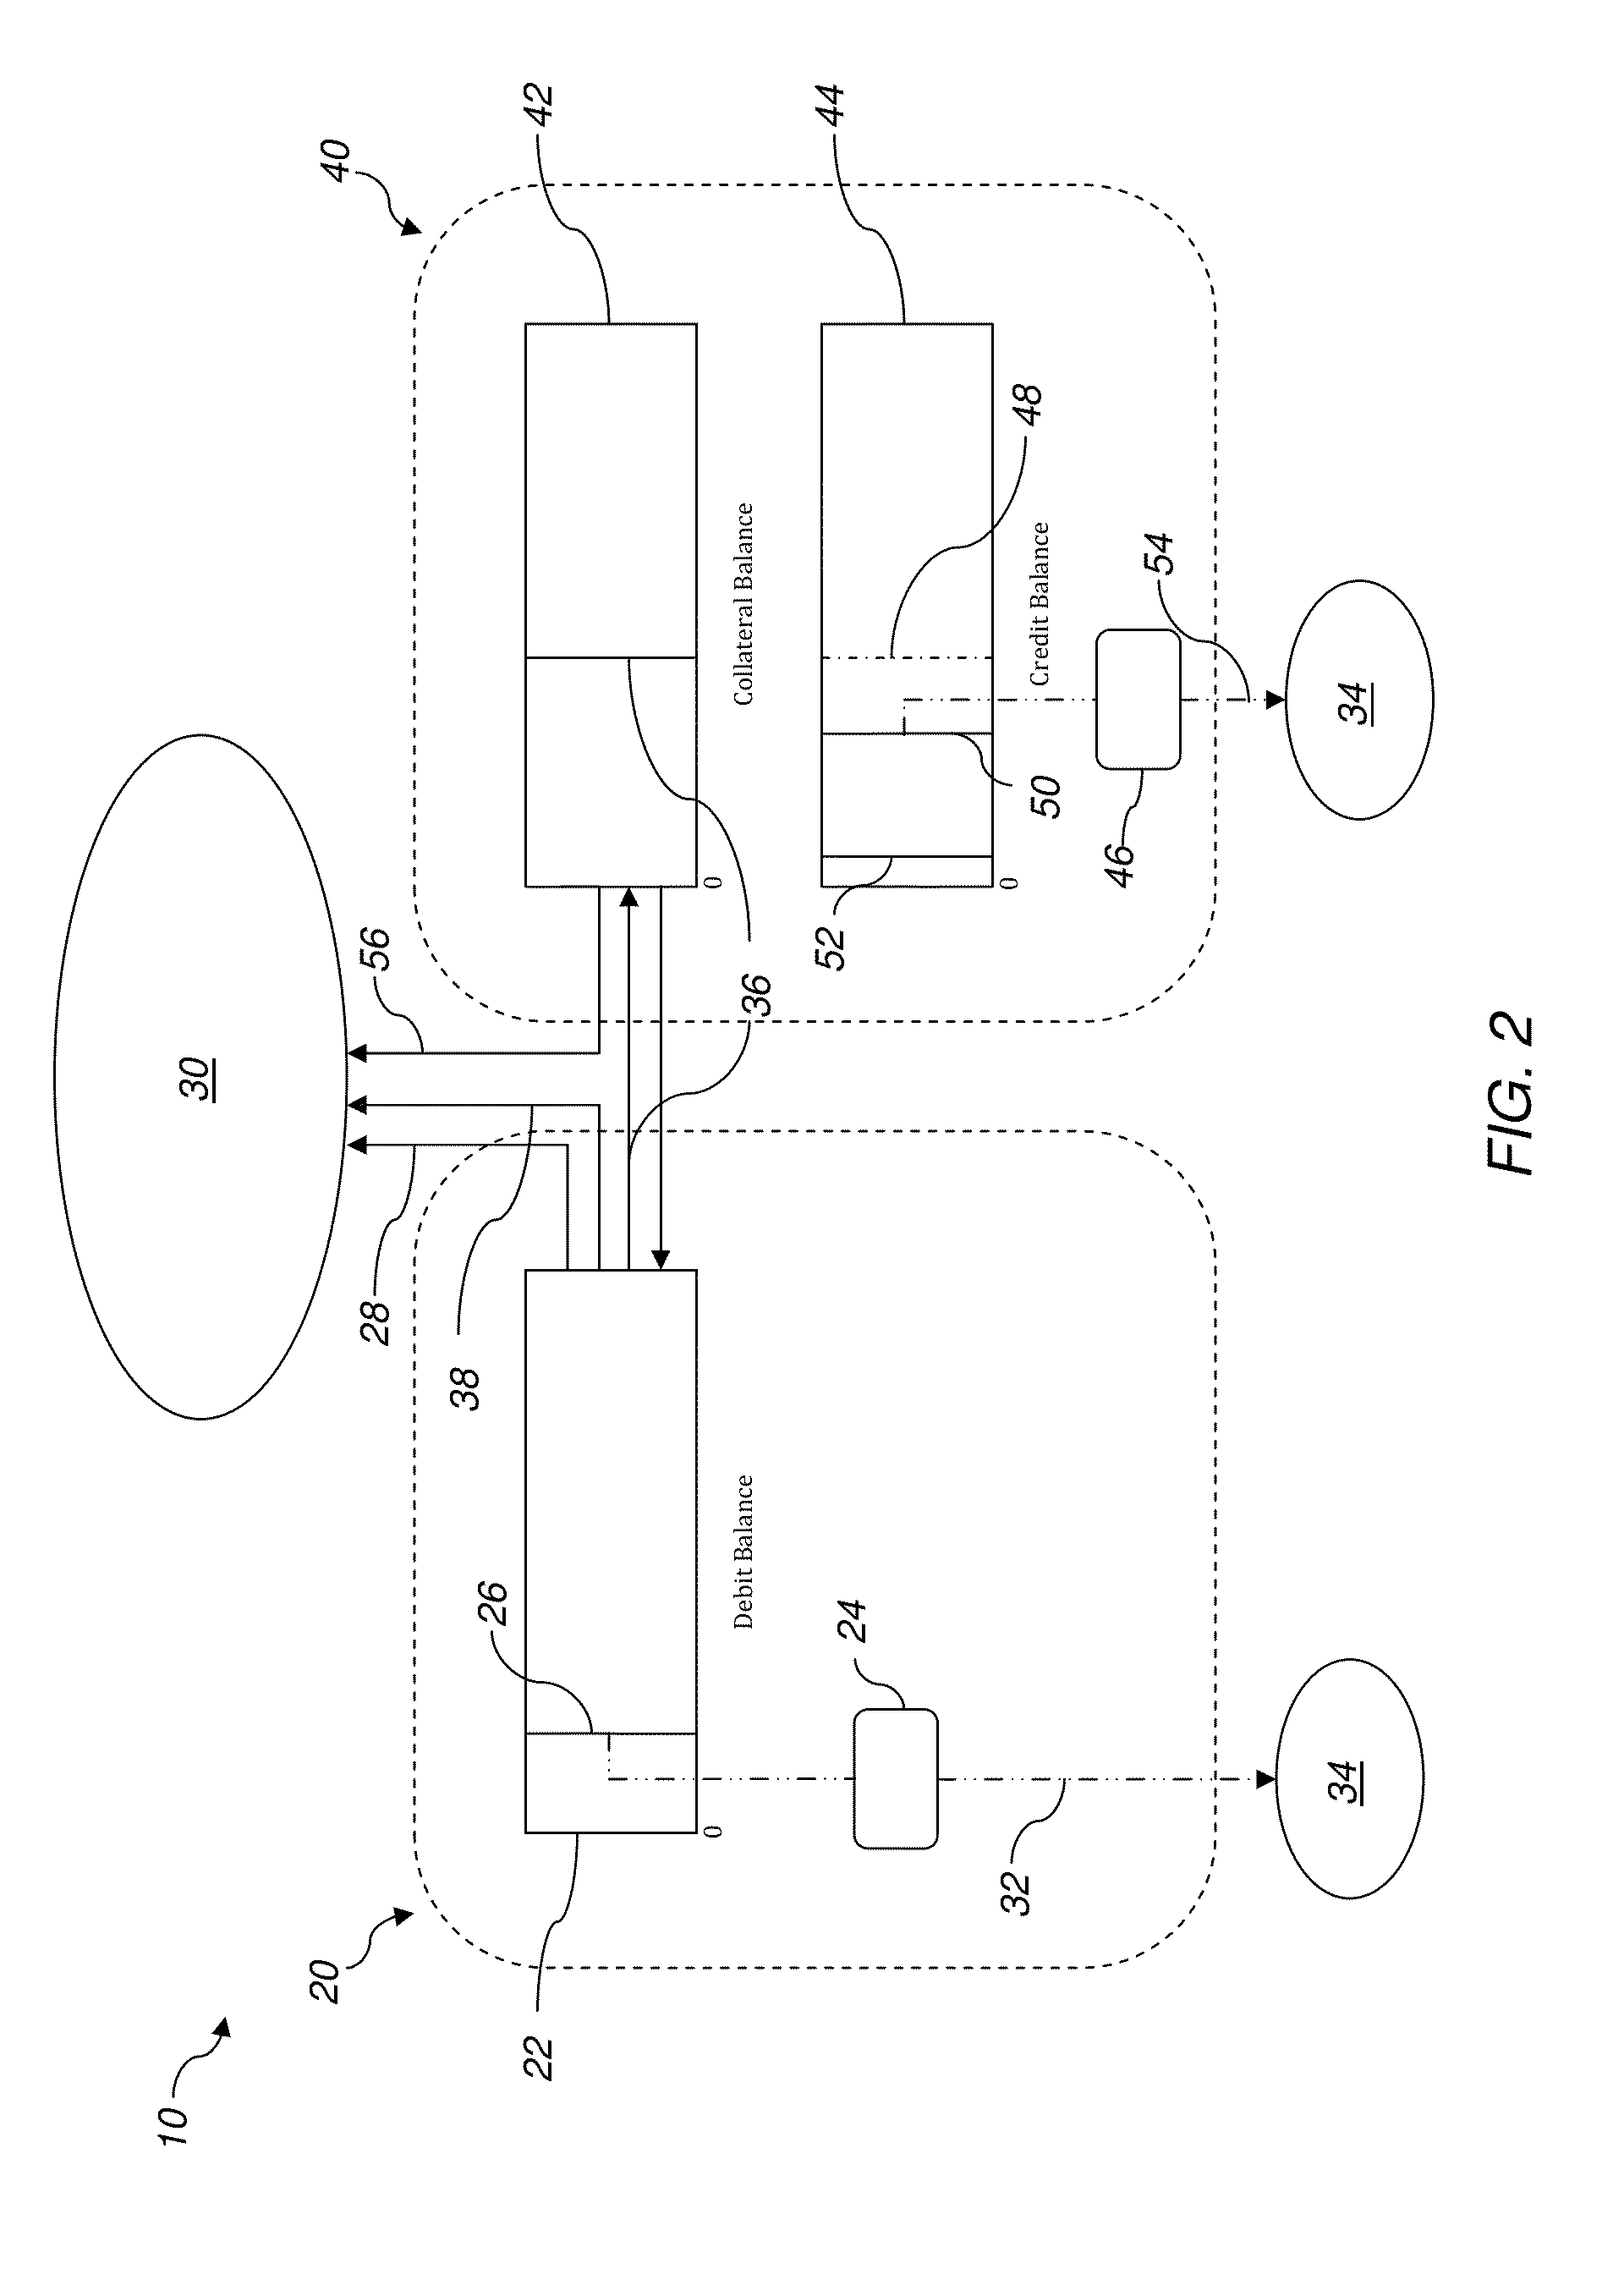 Systems and methods for establishing or improving credit worthiness